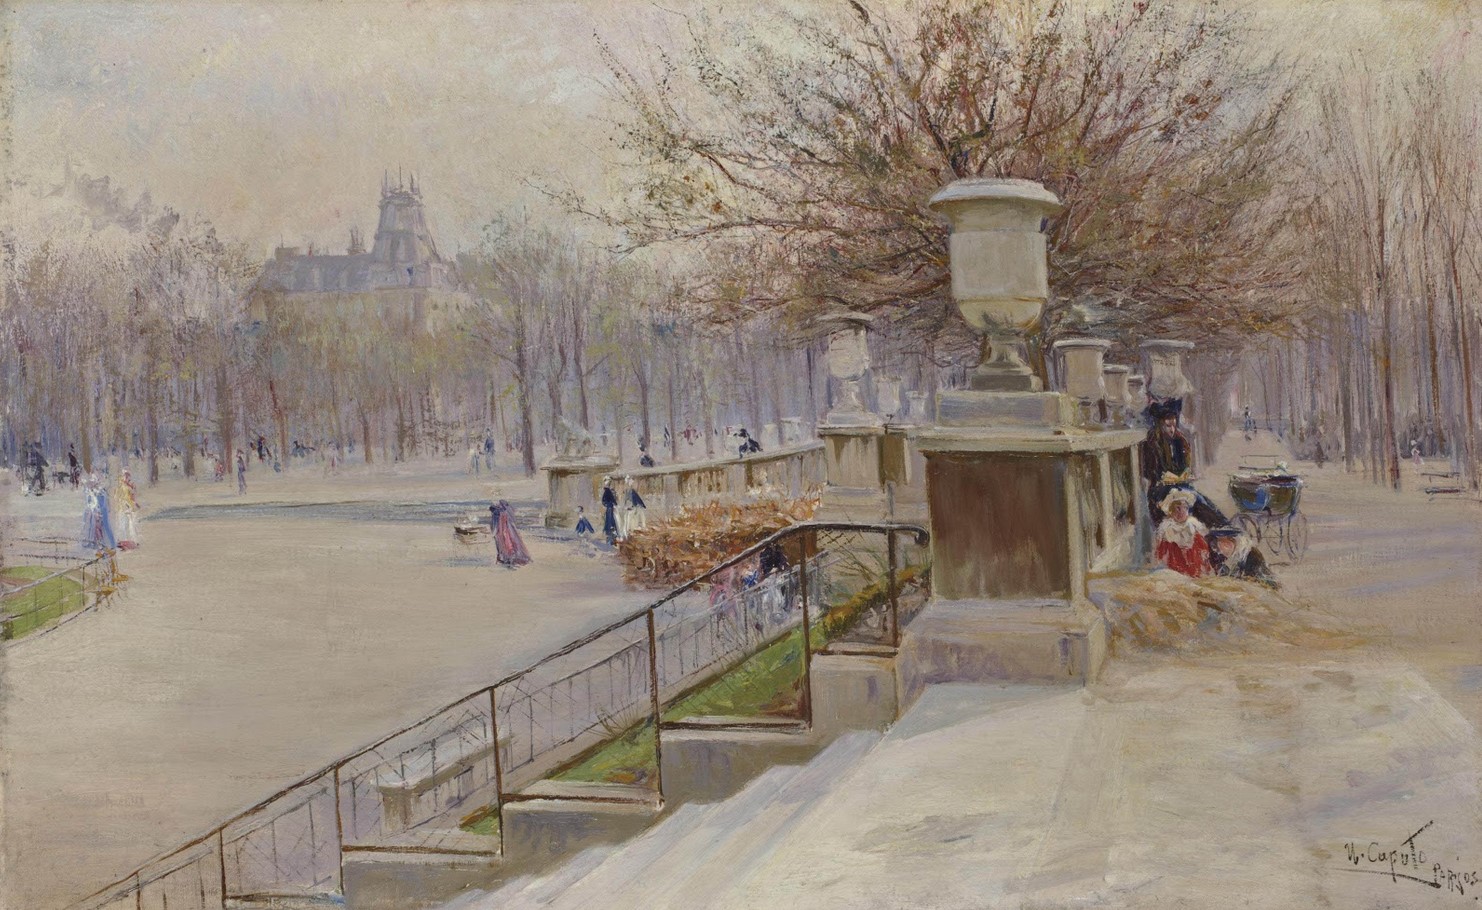 "Le jardin du Luxembourg" by Ulisse Caputo